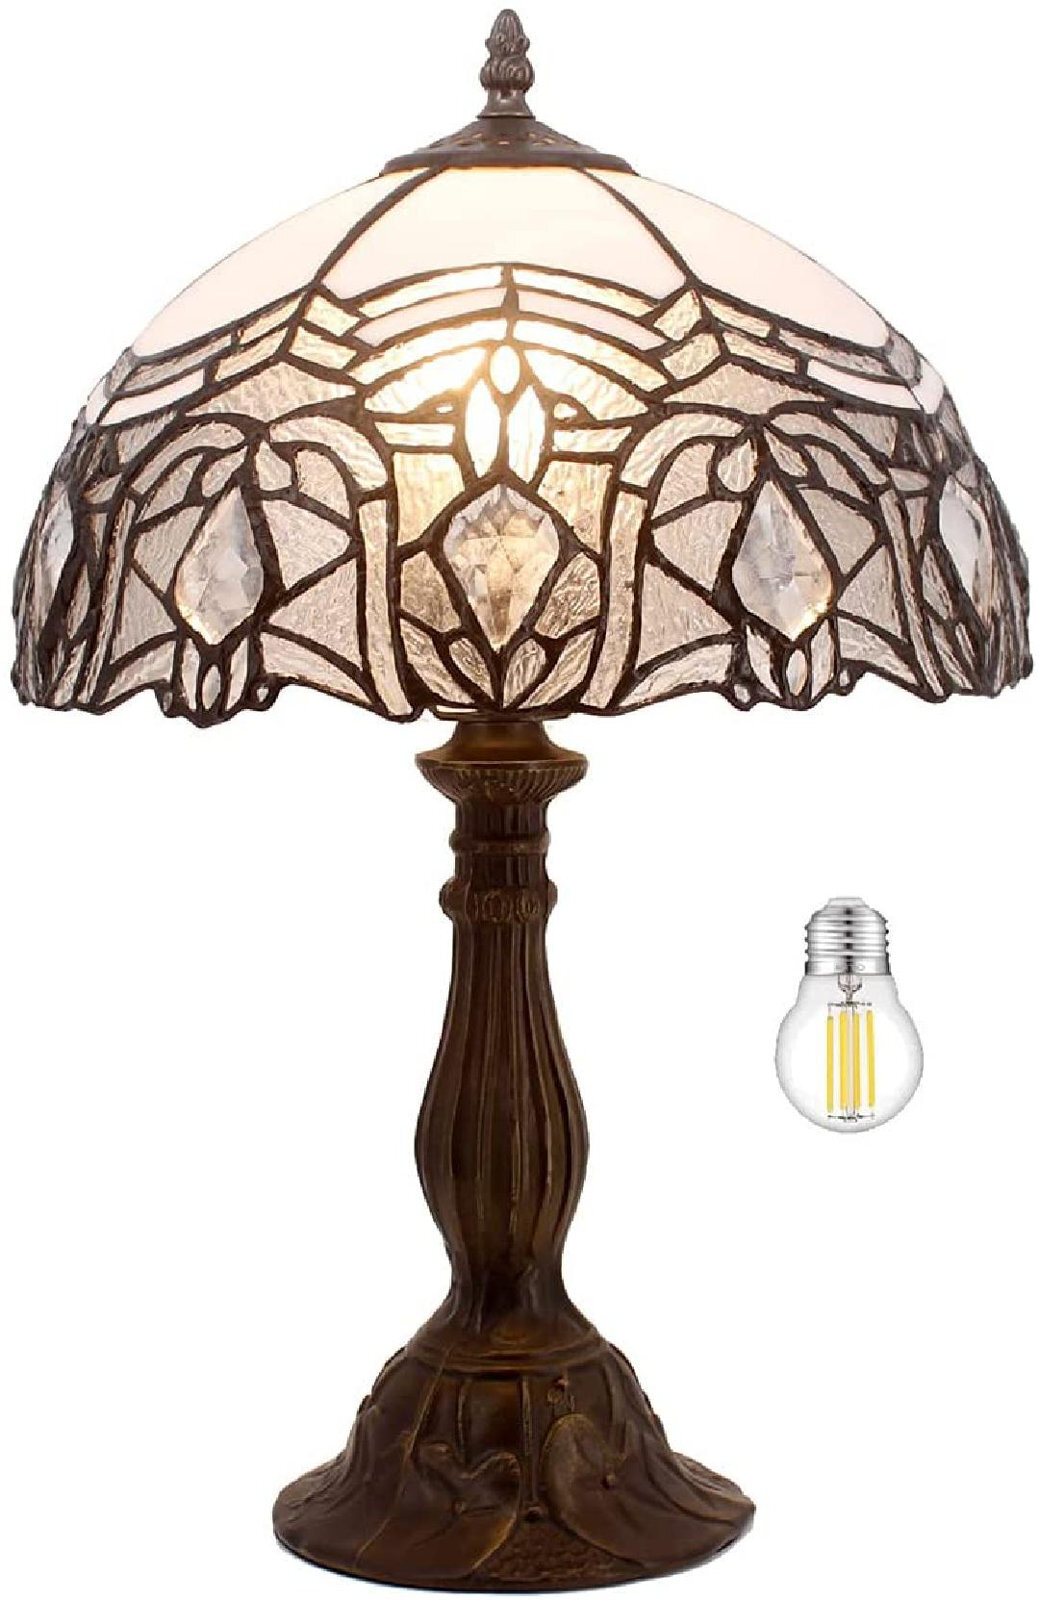 Tiffany Lamp Table White Stained Glass Bedside Lamp Living Room Bedroom Luxurious Desk Reading Light 18